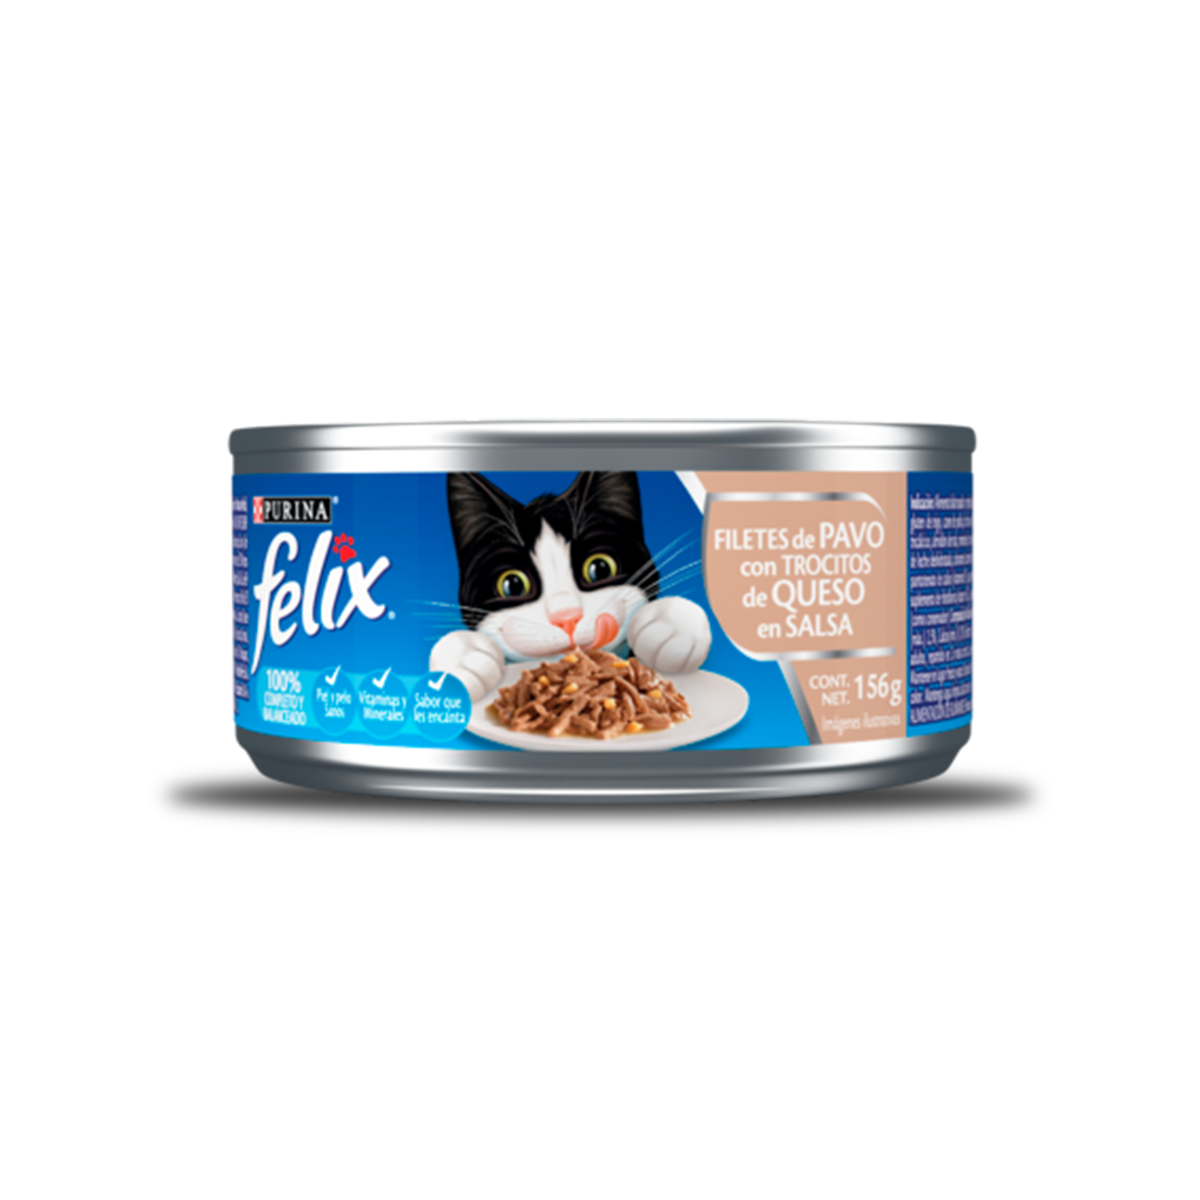 Purina-Felix-Pate-PavoQueso-Lata%20%281%29.png